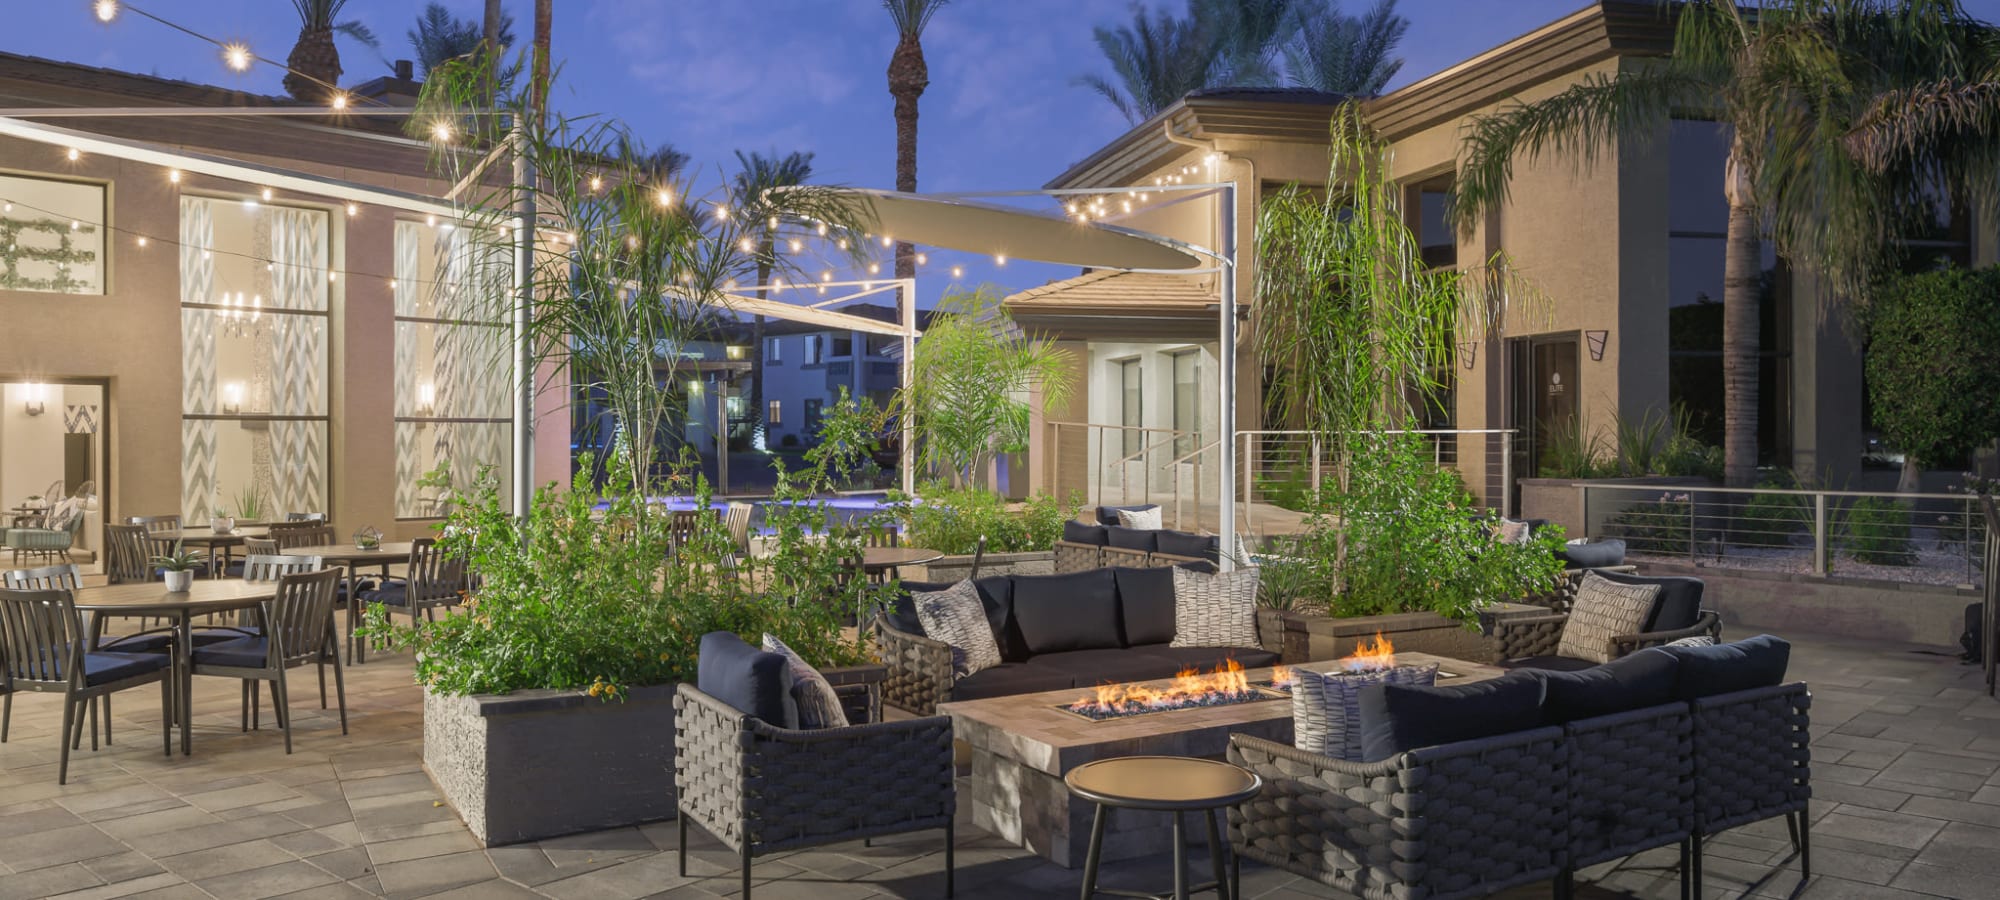 Awesome outdoor firepit area near the pool at Elite North Scottsdale in Scottsdale, Arizona